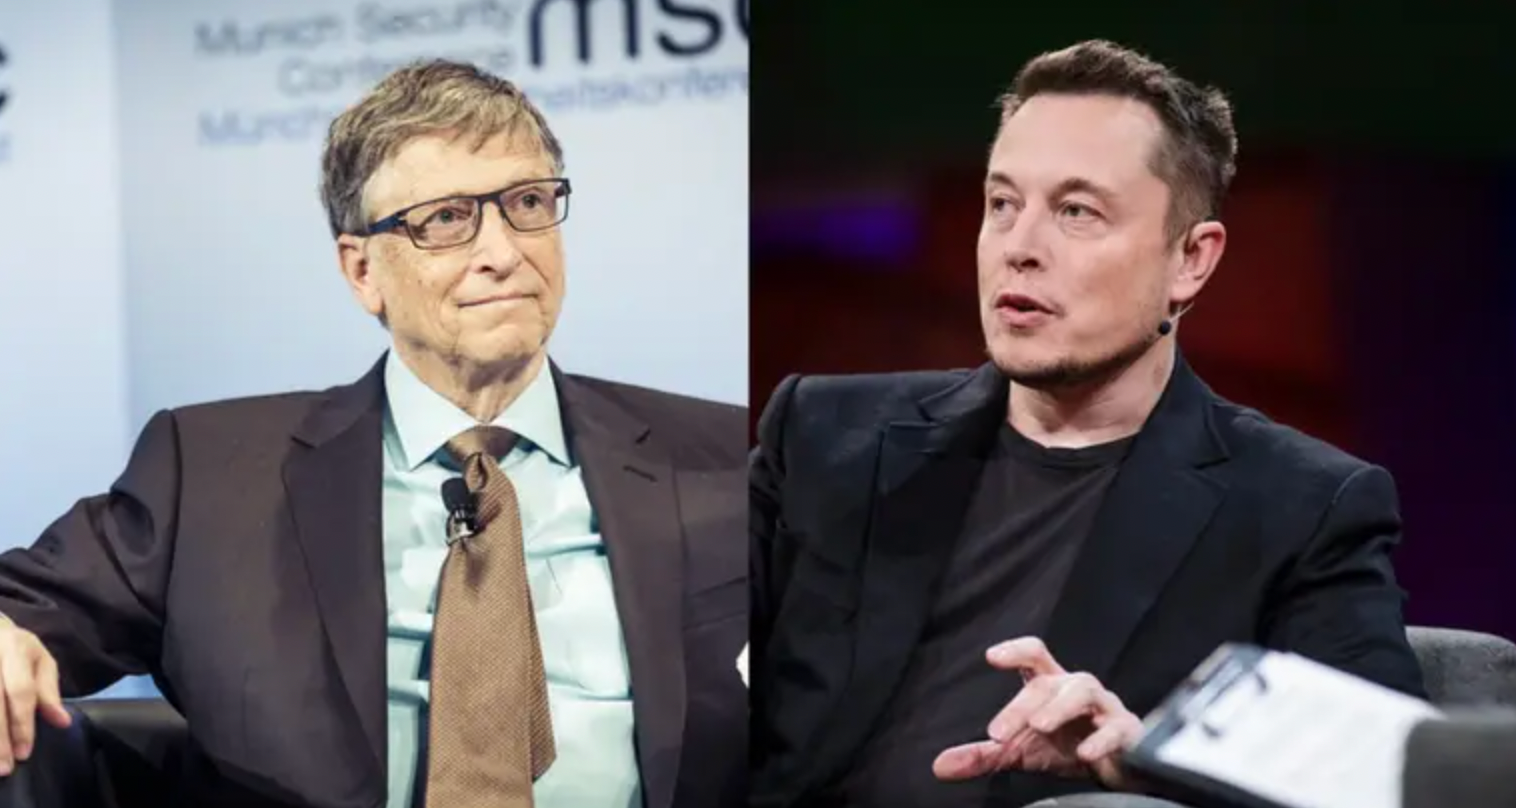 Gates Has Advice For Musk: Focus On Earthly Priorities, Not Mars Exploration